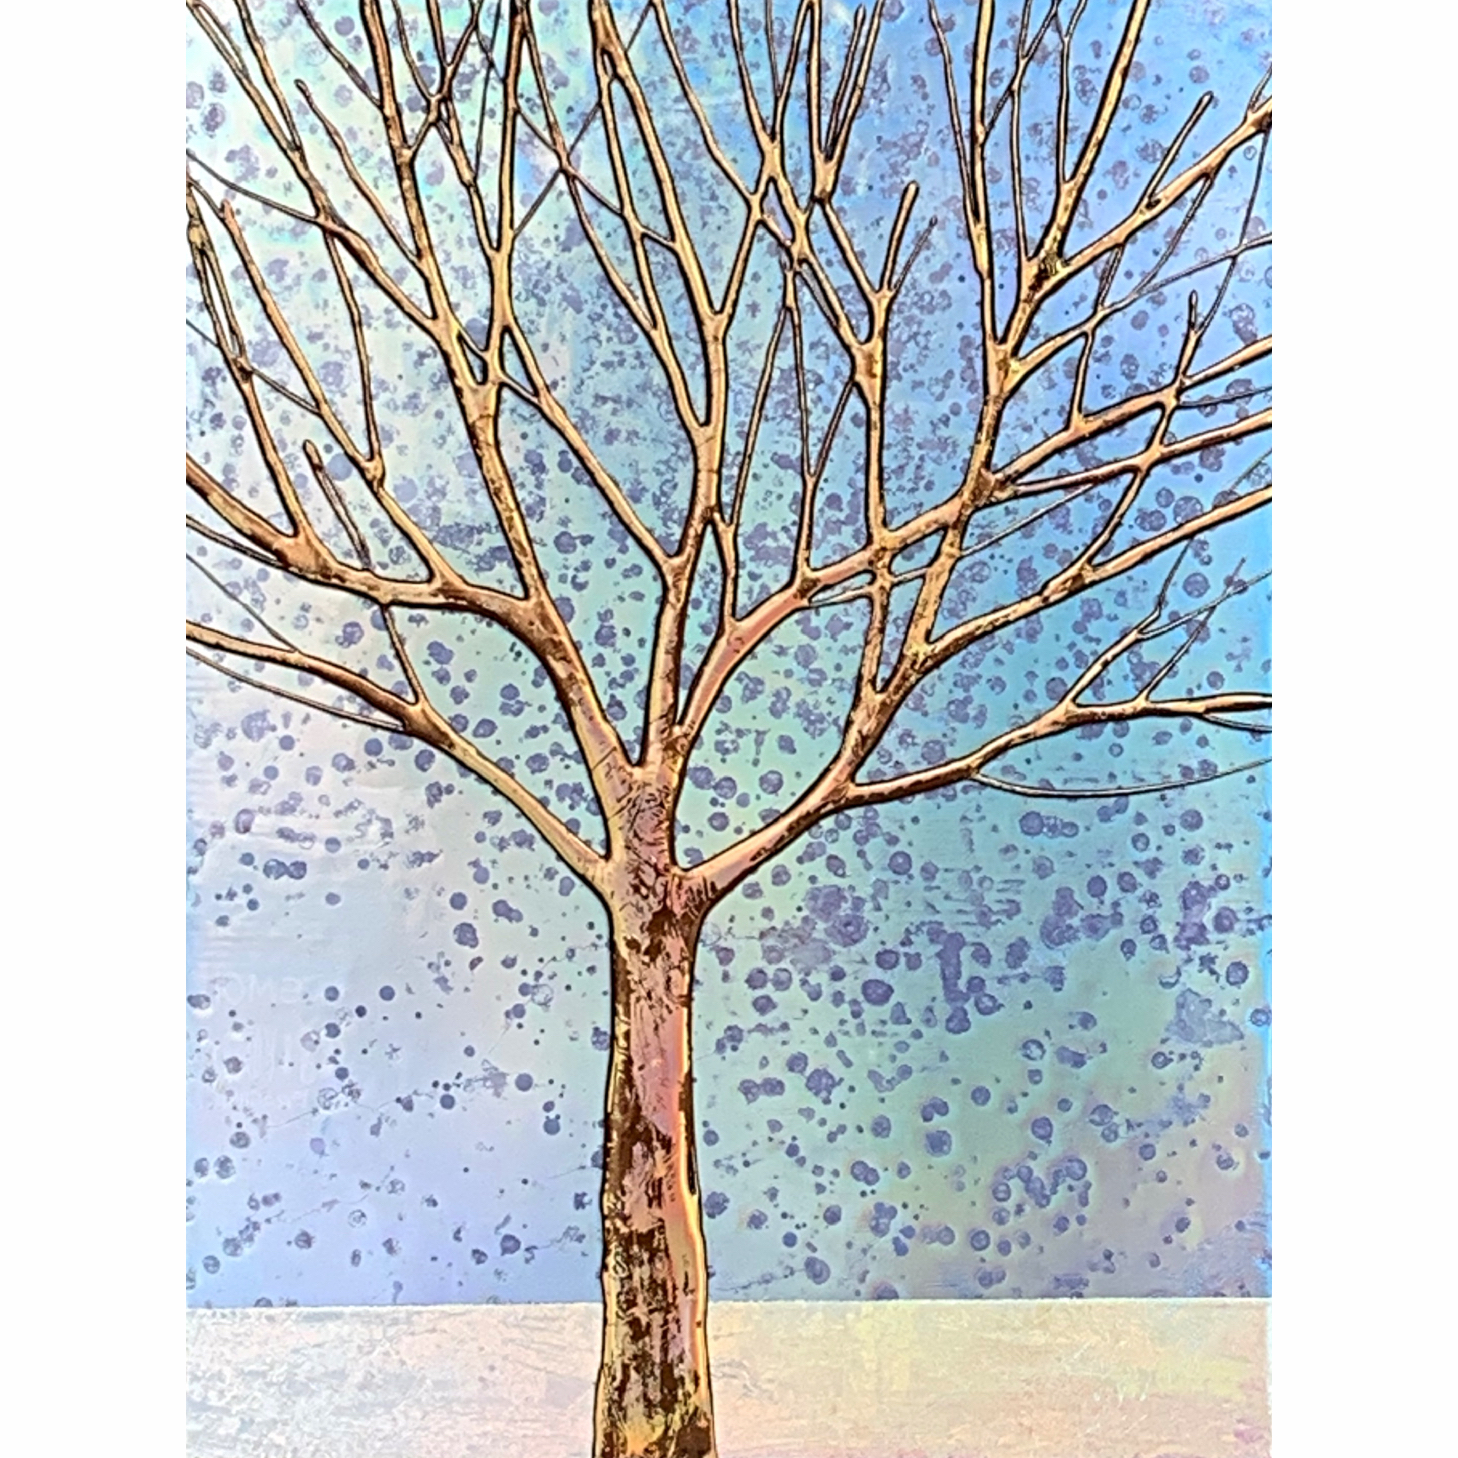 Twilight, mixed media tree painting by Sarah Moffat at Effusion Art Gallery in Invermere, BC.